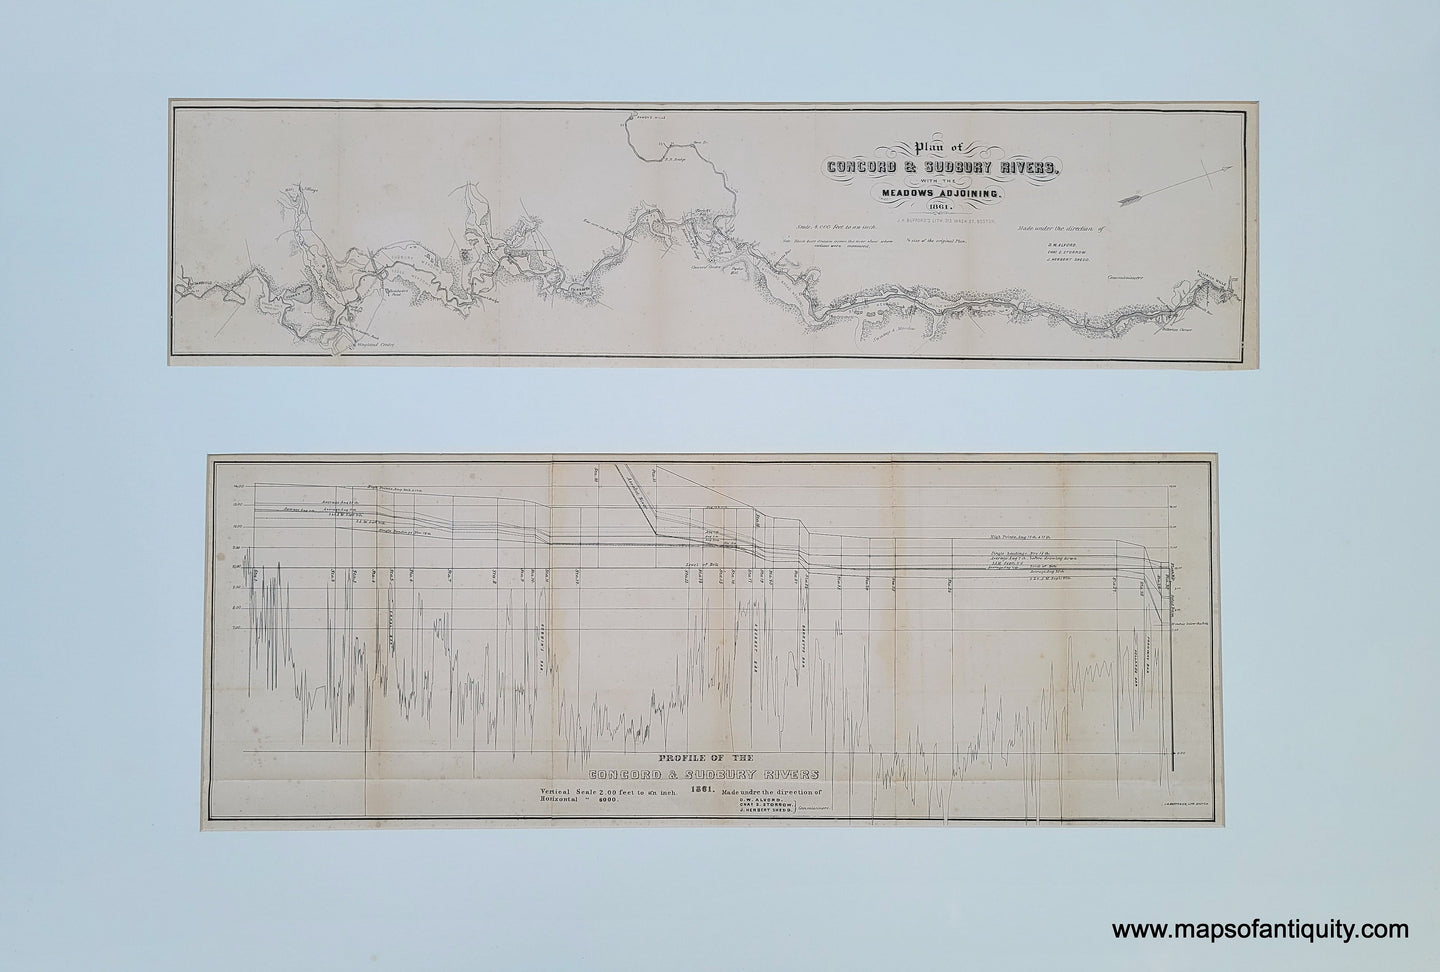 Genuine-Antique-Map-and-Diagram-Plan-of-Concord-Sudbury-Rivers-with-the-Meadows-Adjoining-and-Profile-of-the-Concord-and-Sudbury-Rivers-1861-Bufford-Maps-Of-Antiquity